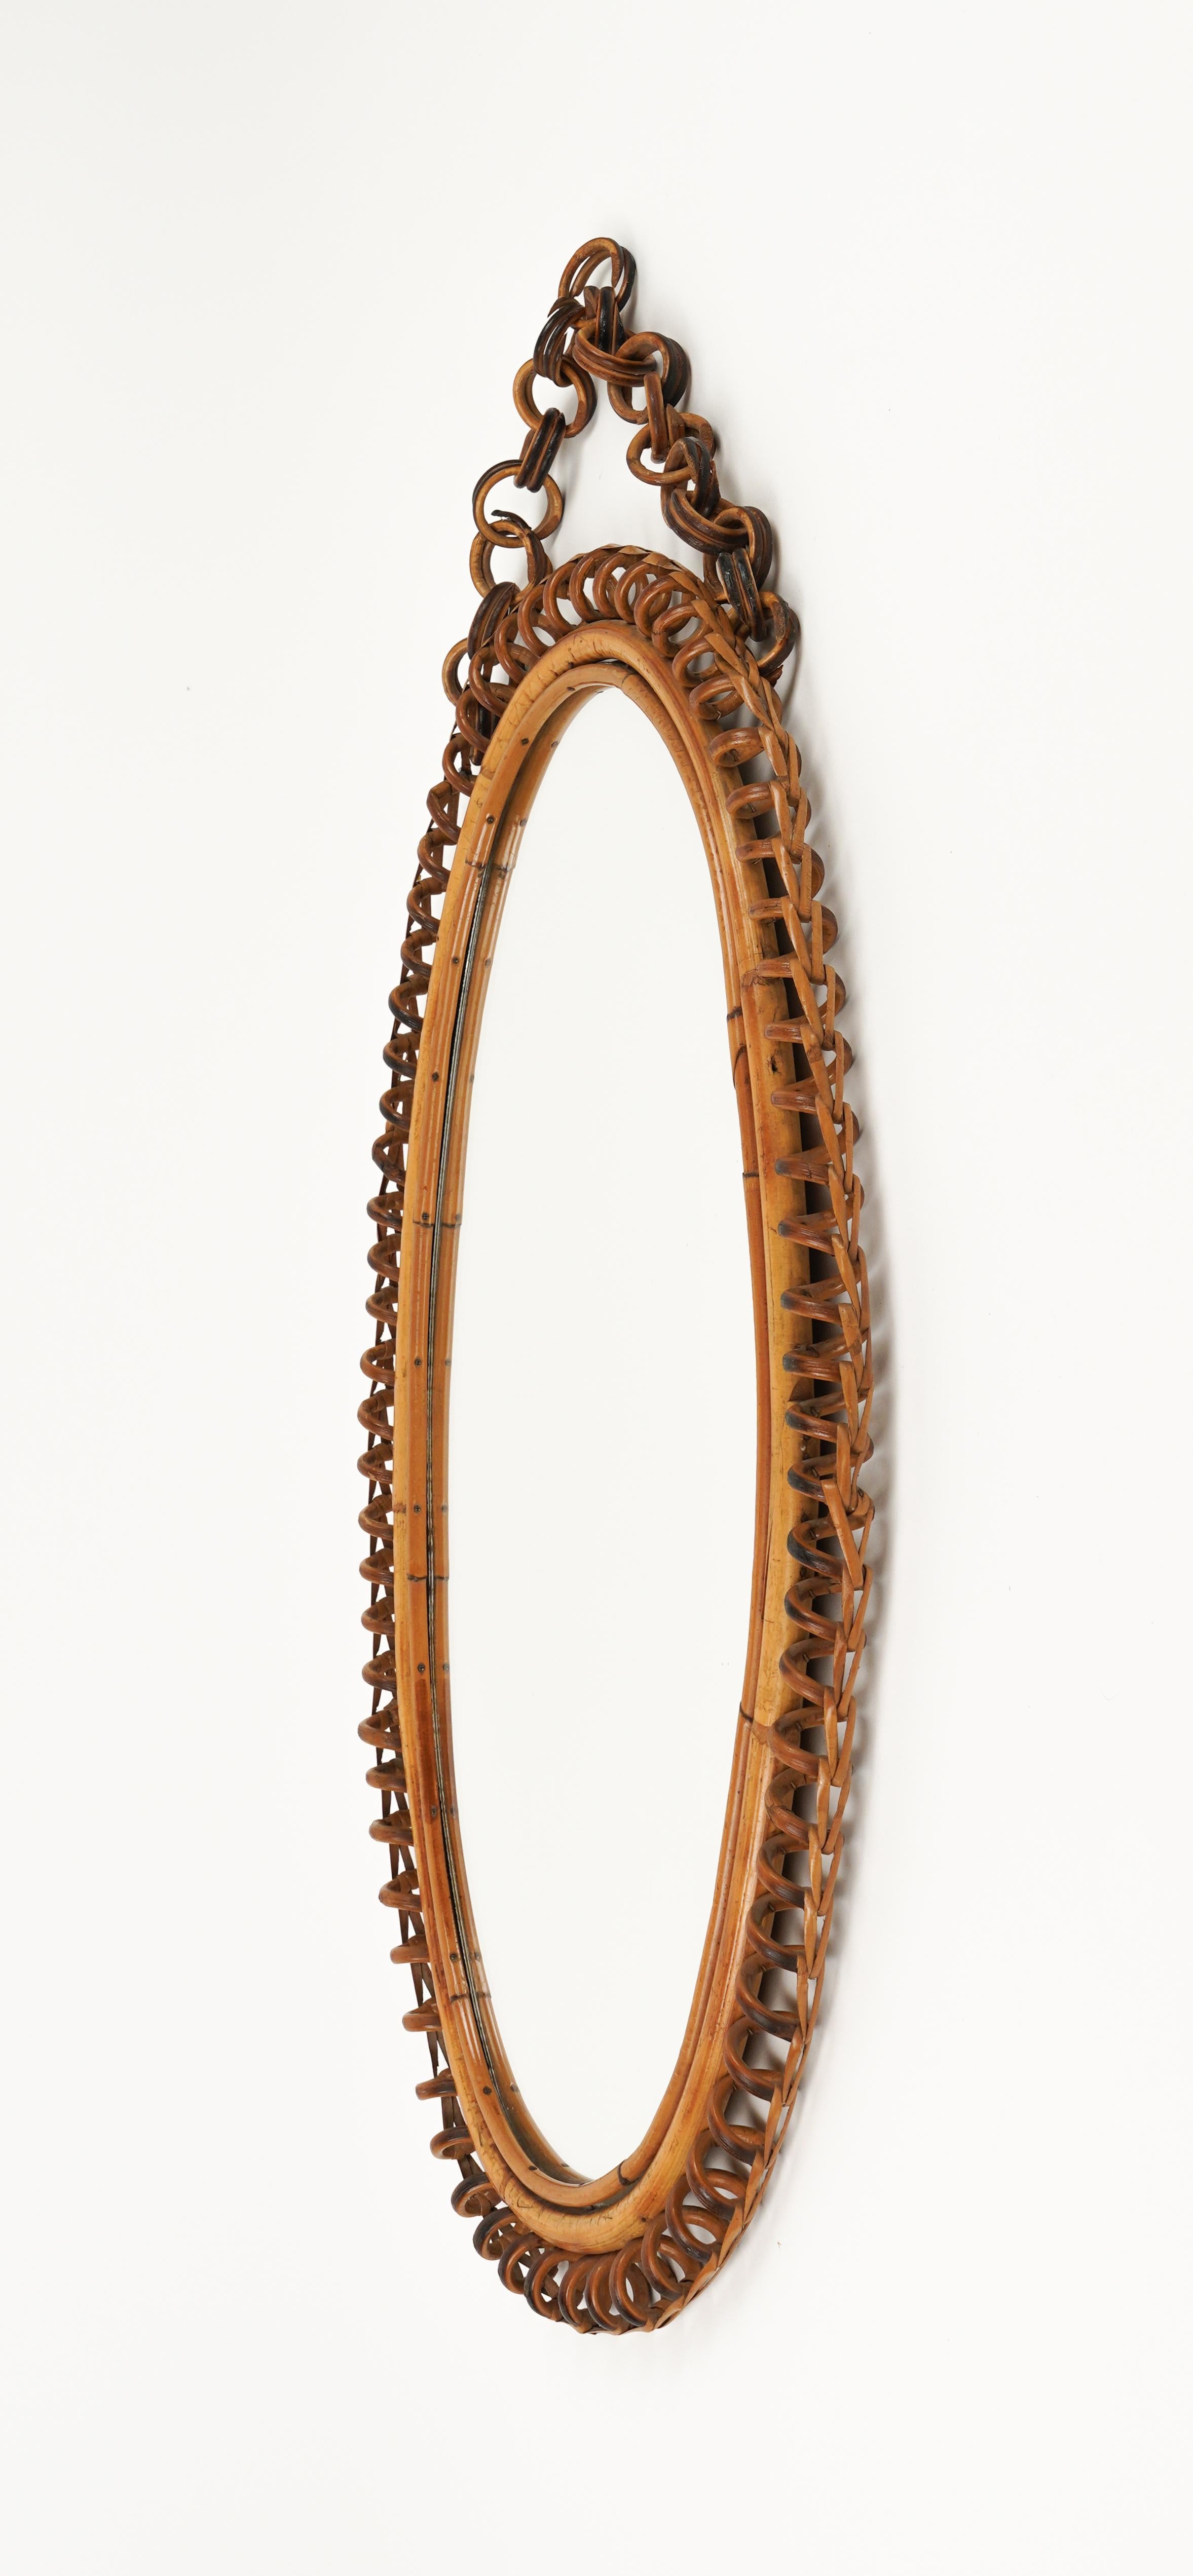 Midcentury Rattan & Bamboo Oval Wall Mirror with Chain, Italy 1960s For Sale 1